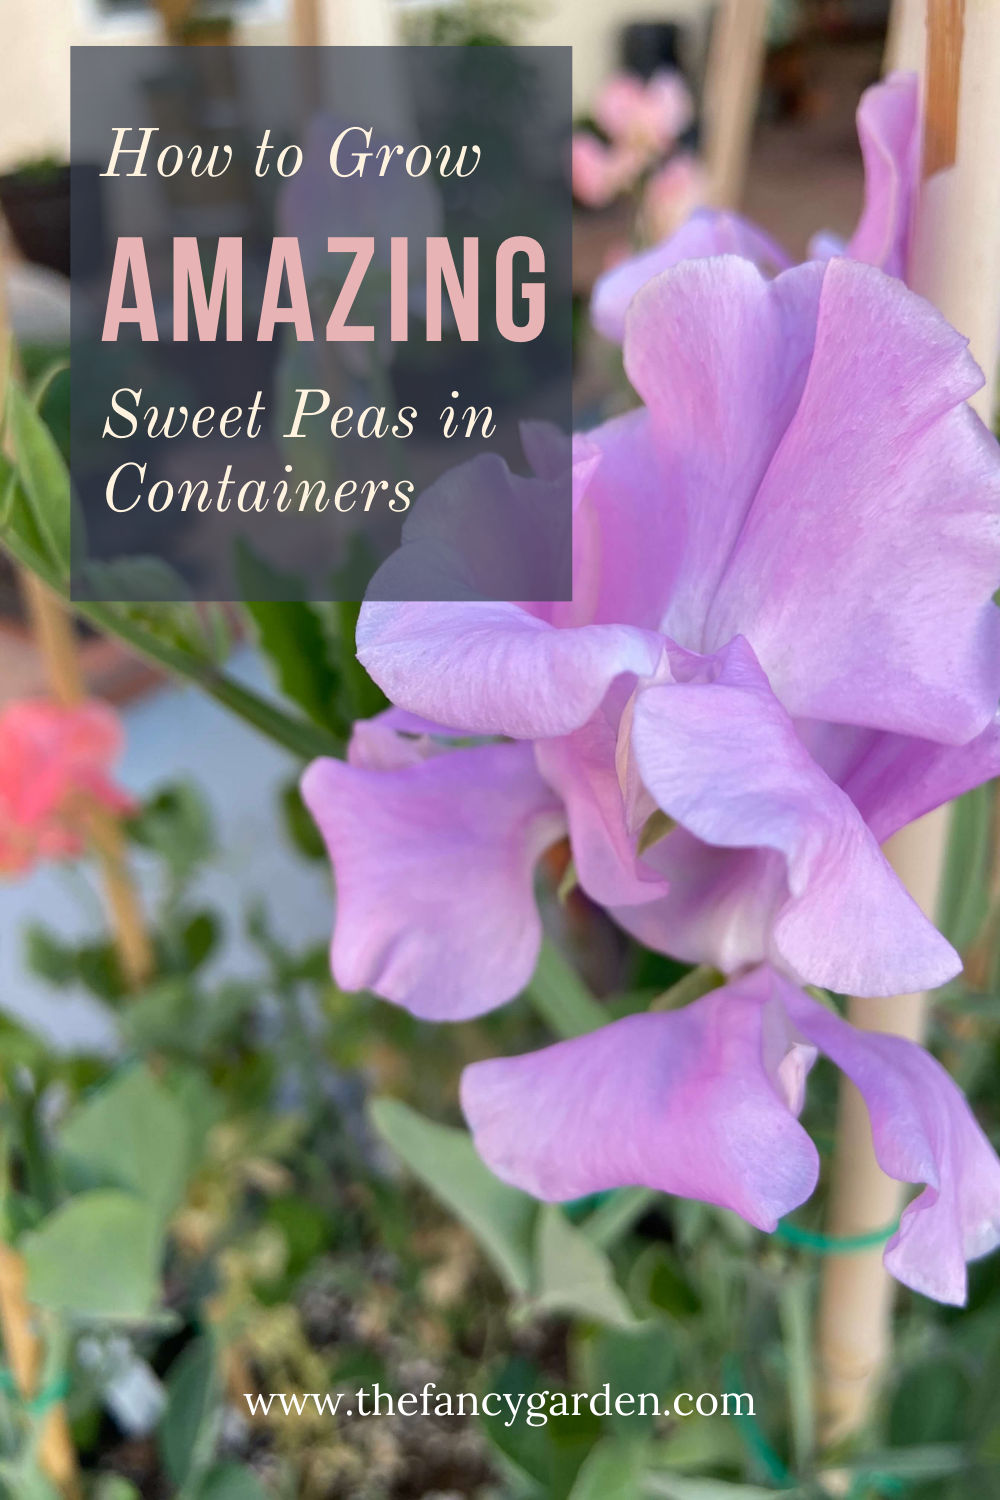 How to grow amazing sweet peas in containers